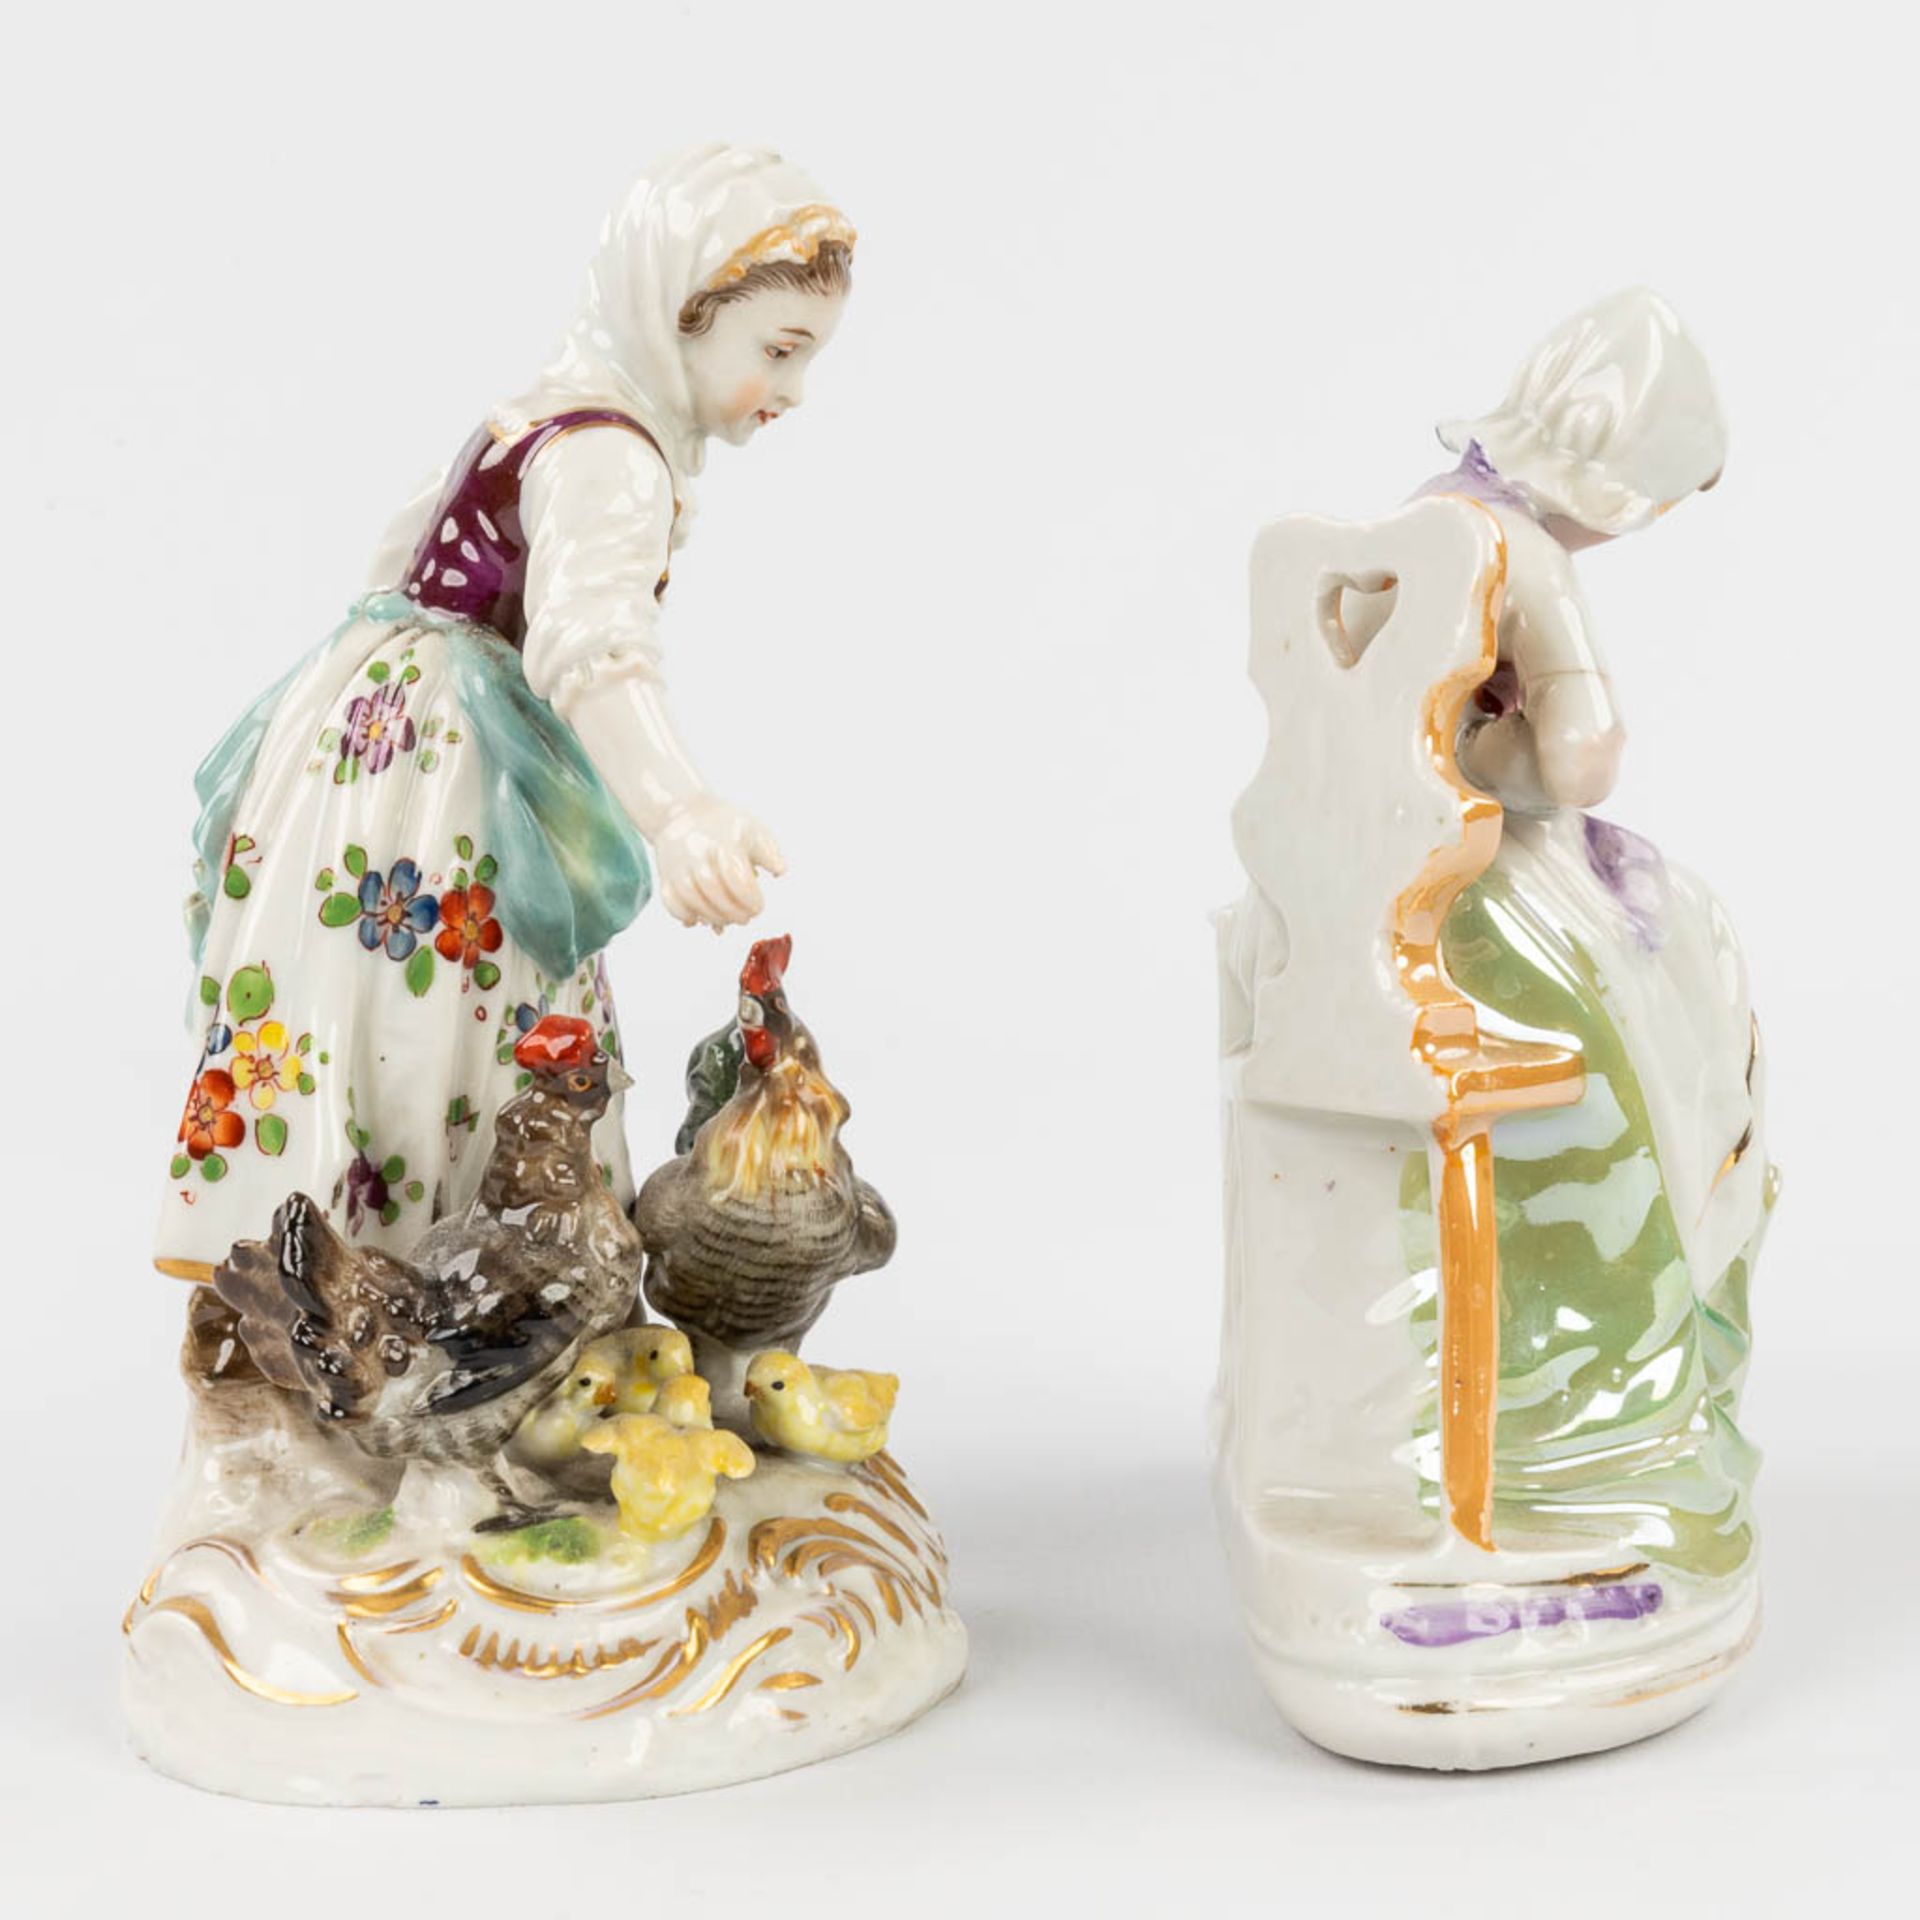 Volkstedt, a collection of 2 figurines made of porcelain in Germany. (H:13 cm) - Image 6 of 14